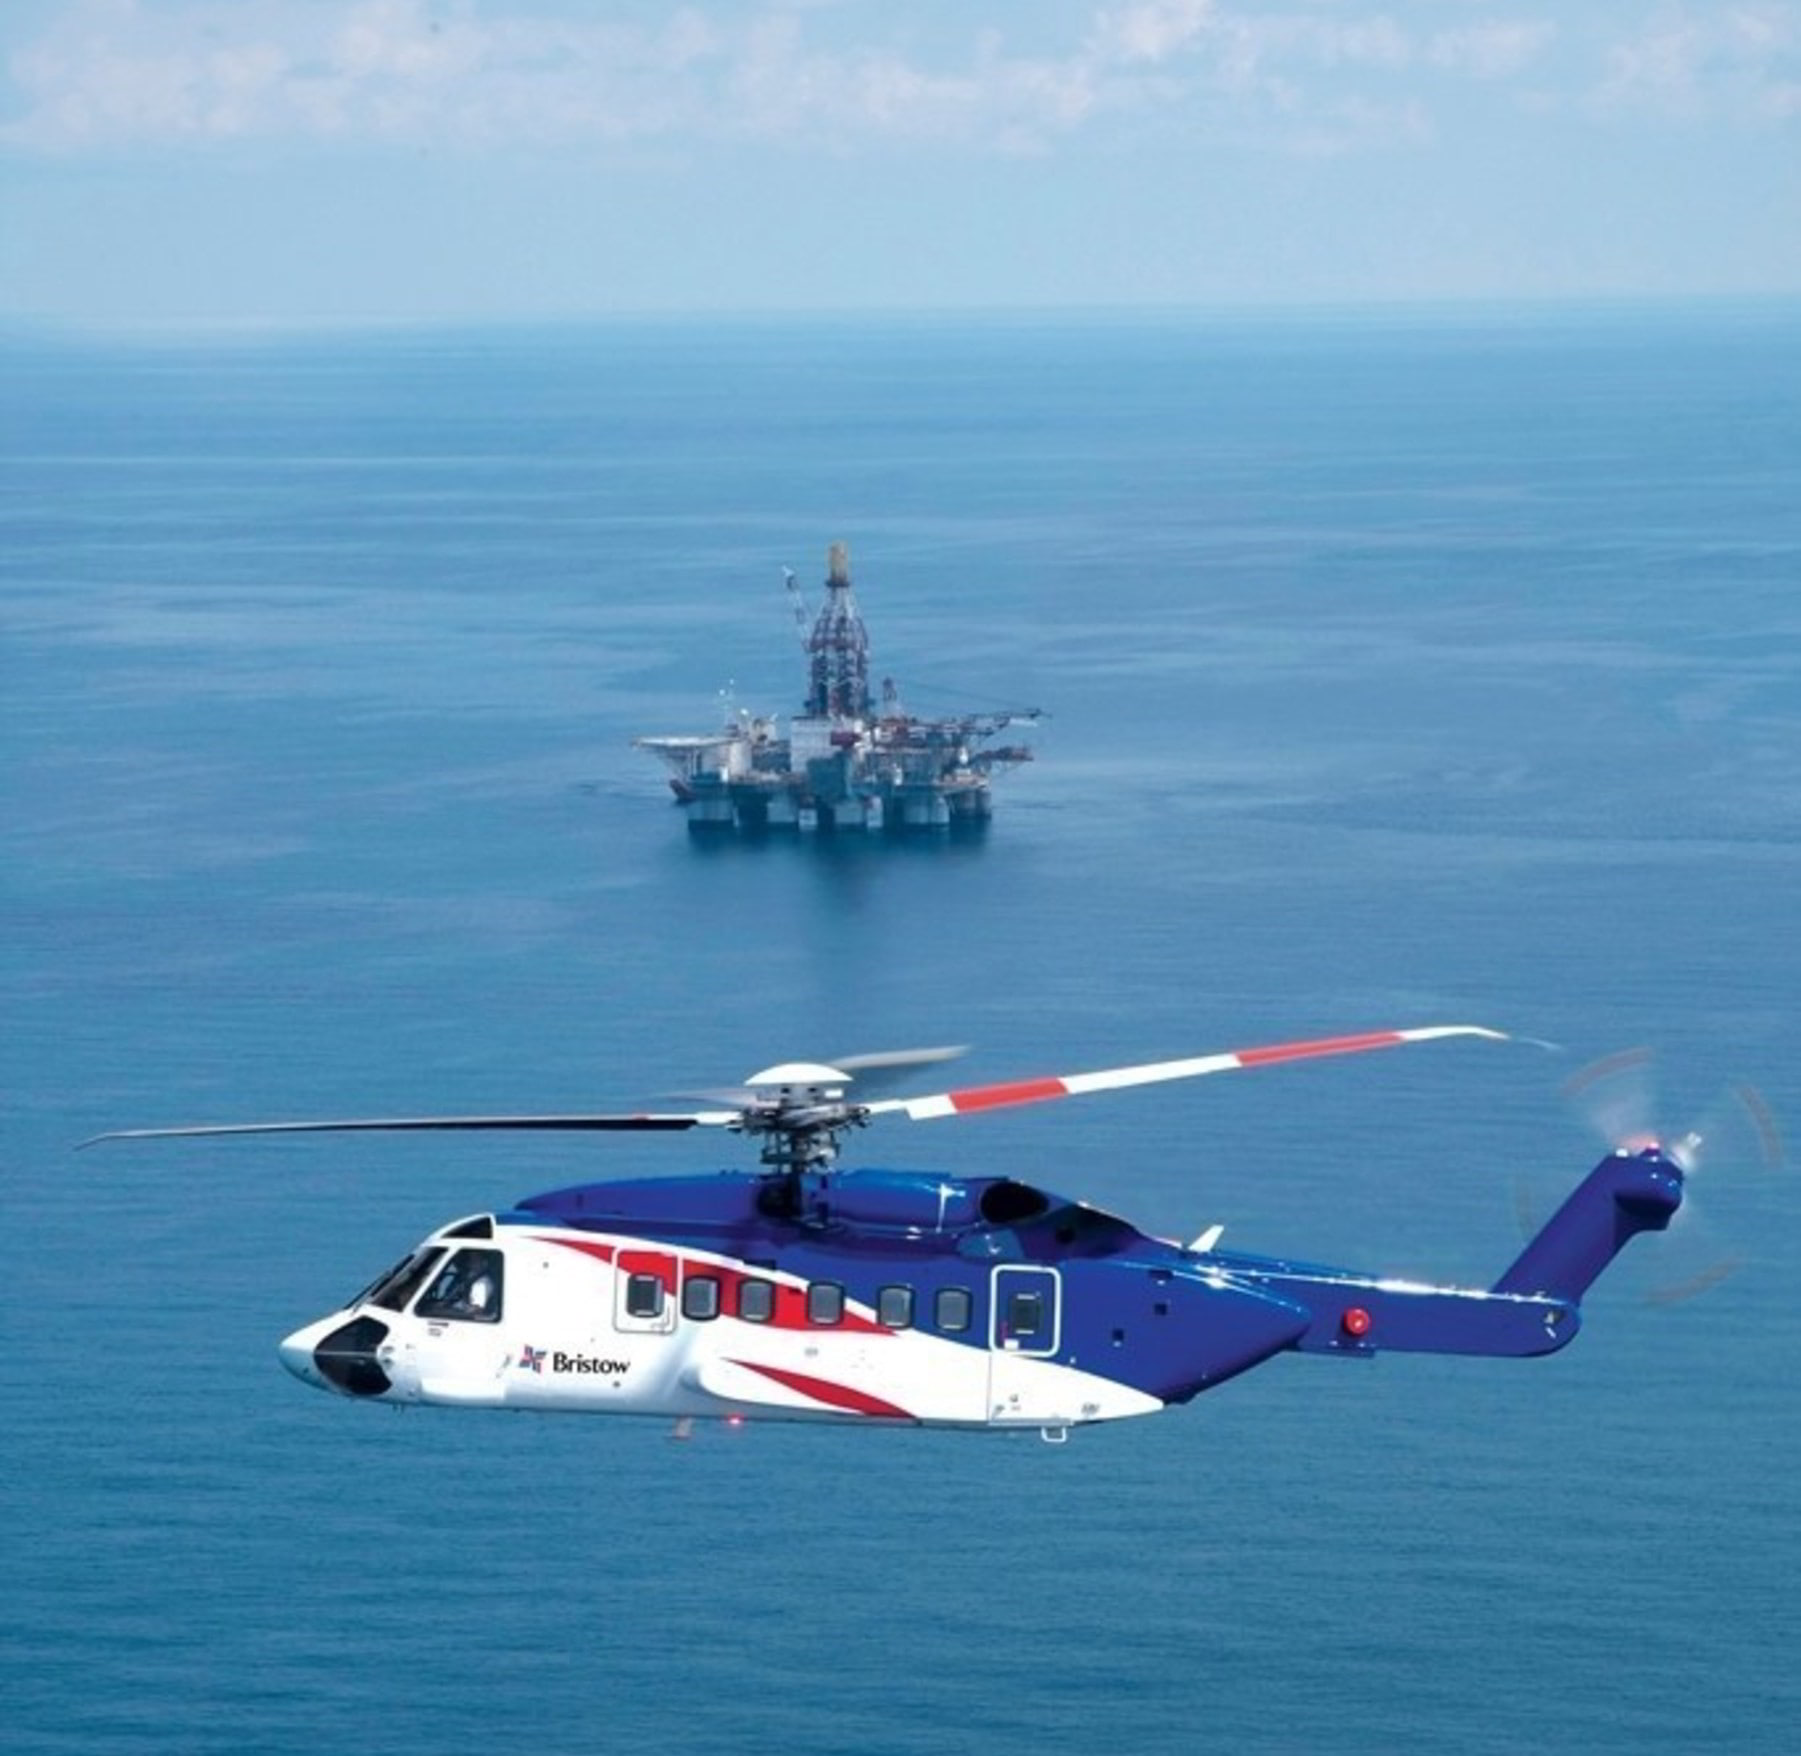 Norwegian oil & gas giant hands out four-year deal to offshore helicopter operator